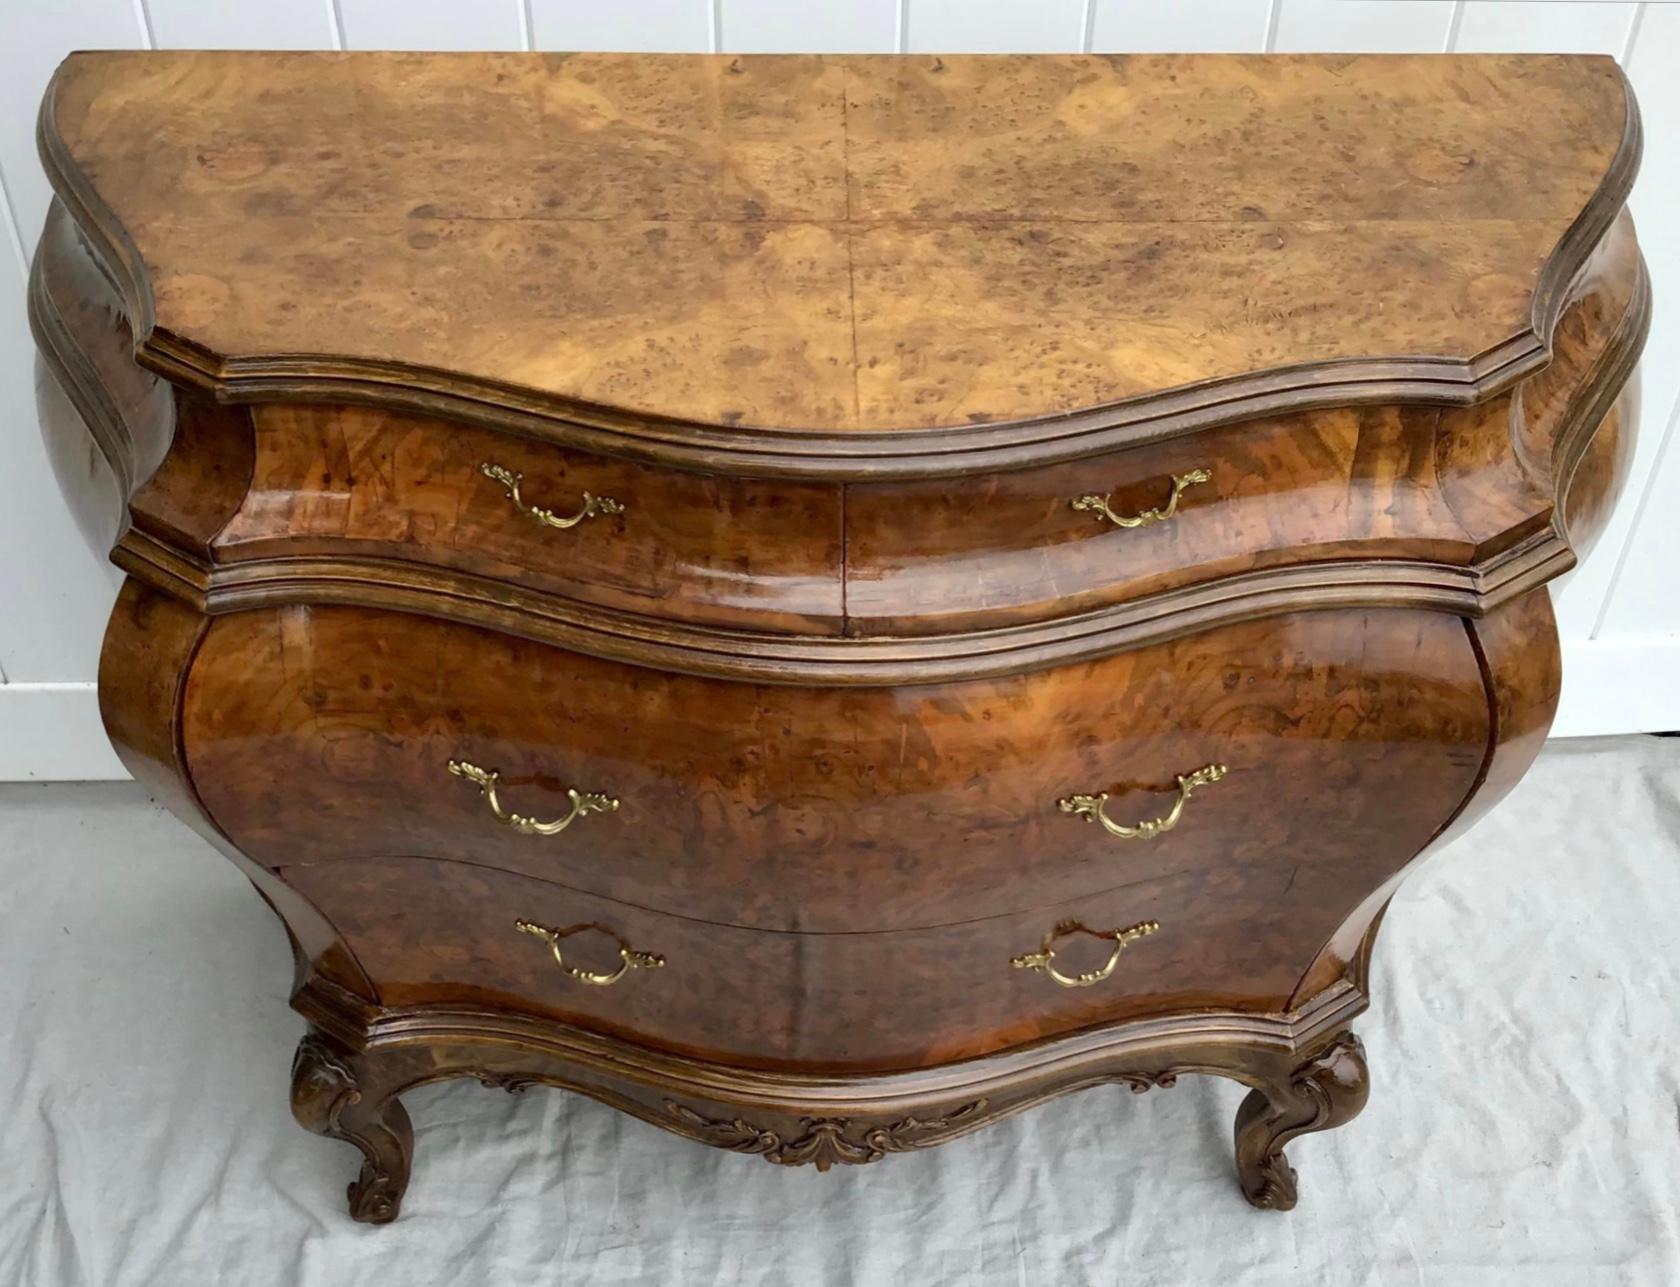 Italian Louis XV-style Bombay chest is made of wood covered in burl veneers in a beautiful golden stain finish. The chest features two small drawers above two large drawers with decorative brass drawer pulls and ample storage space. This Bombay